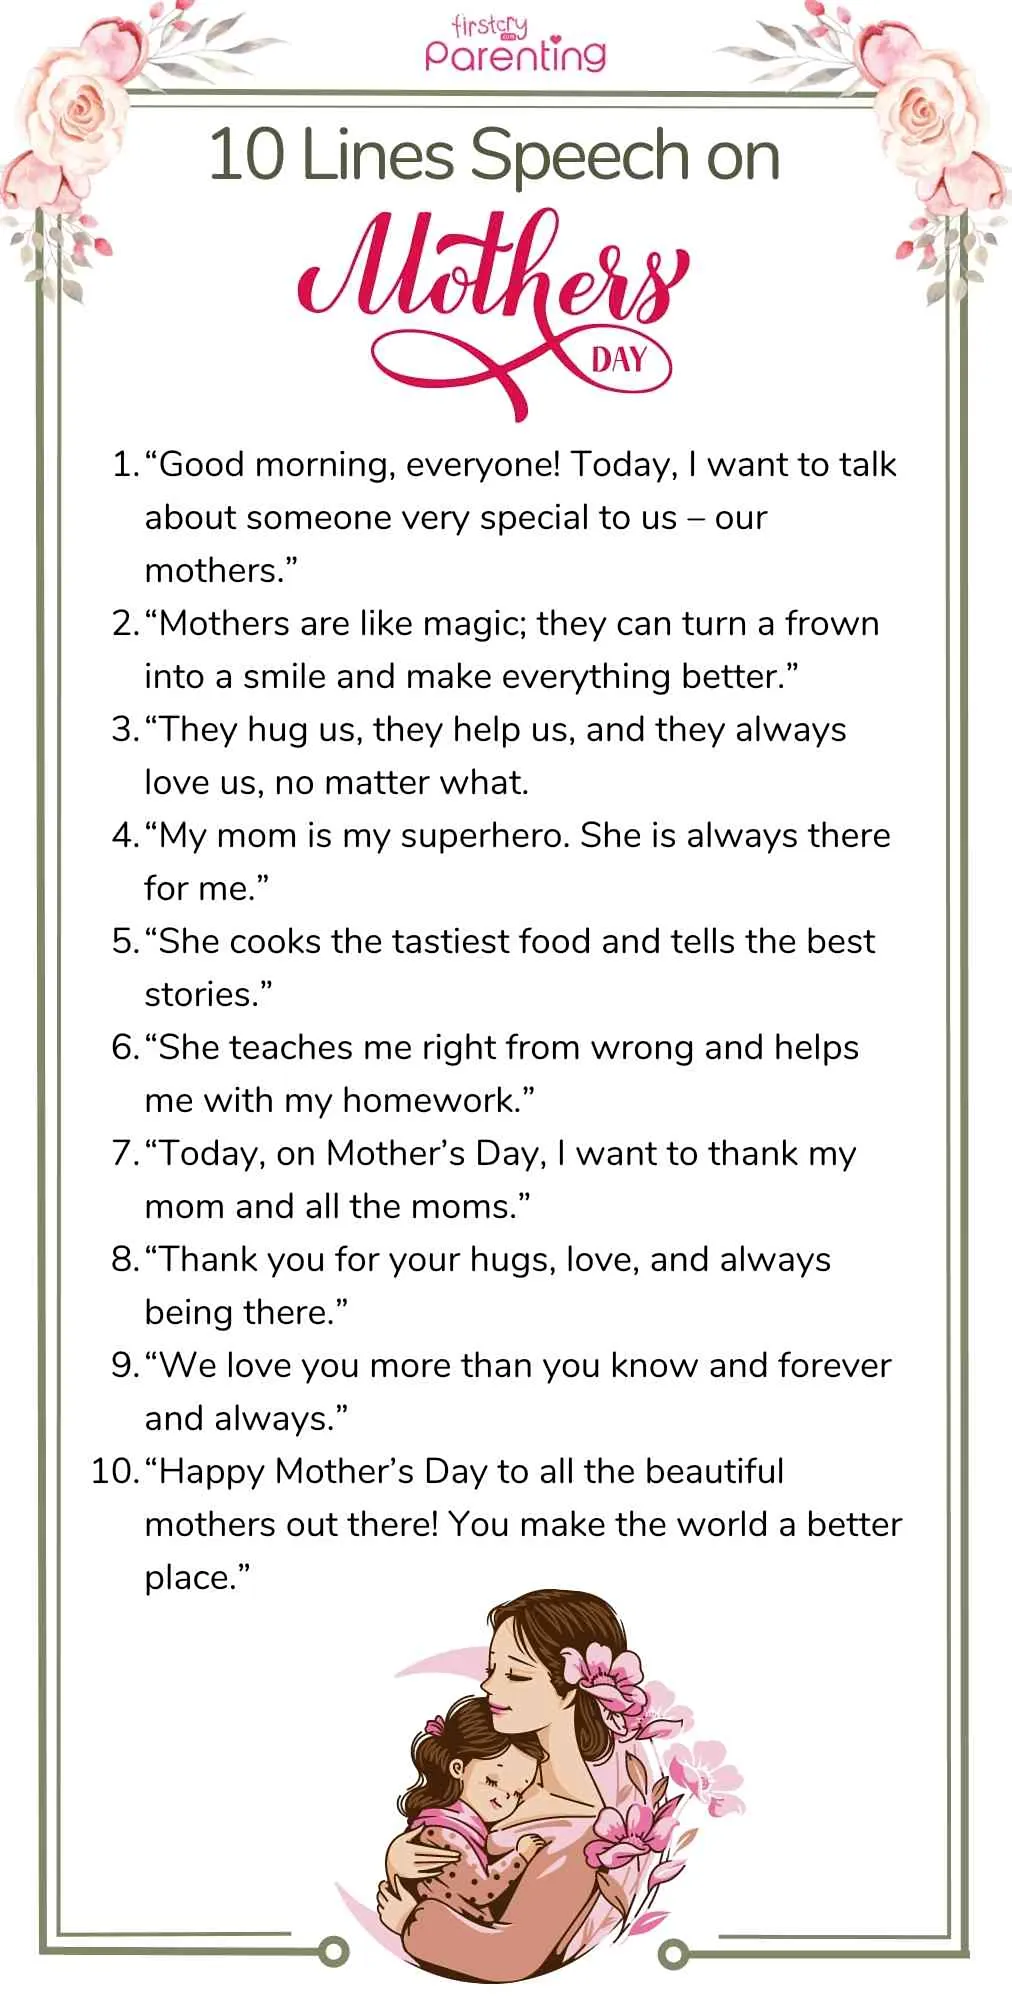 10 Lines Speech on Mother's Day